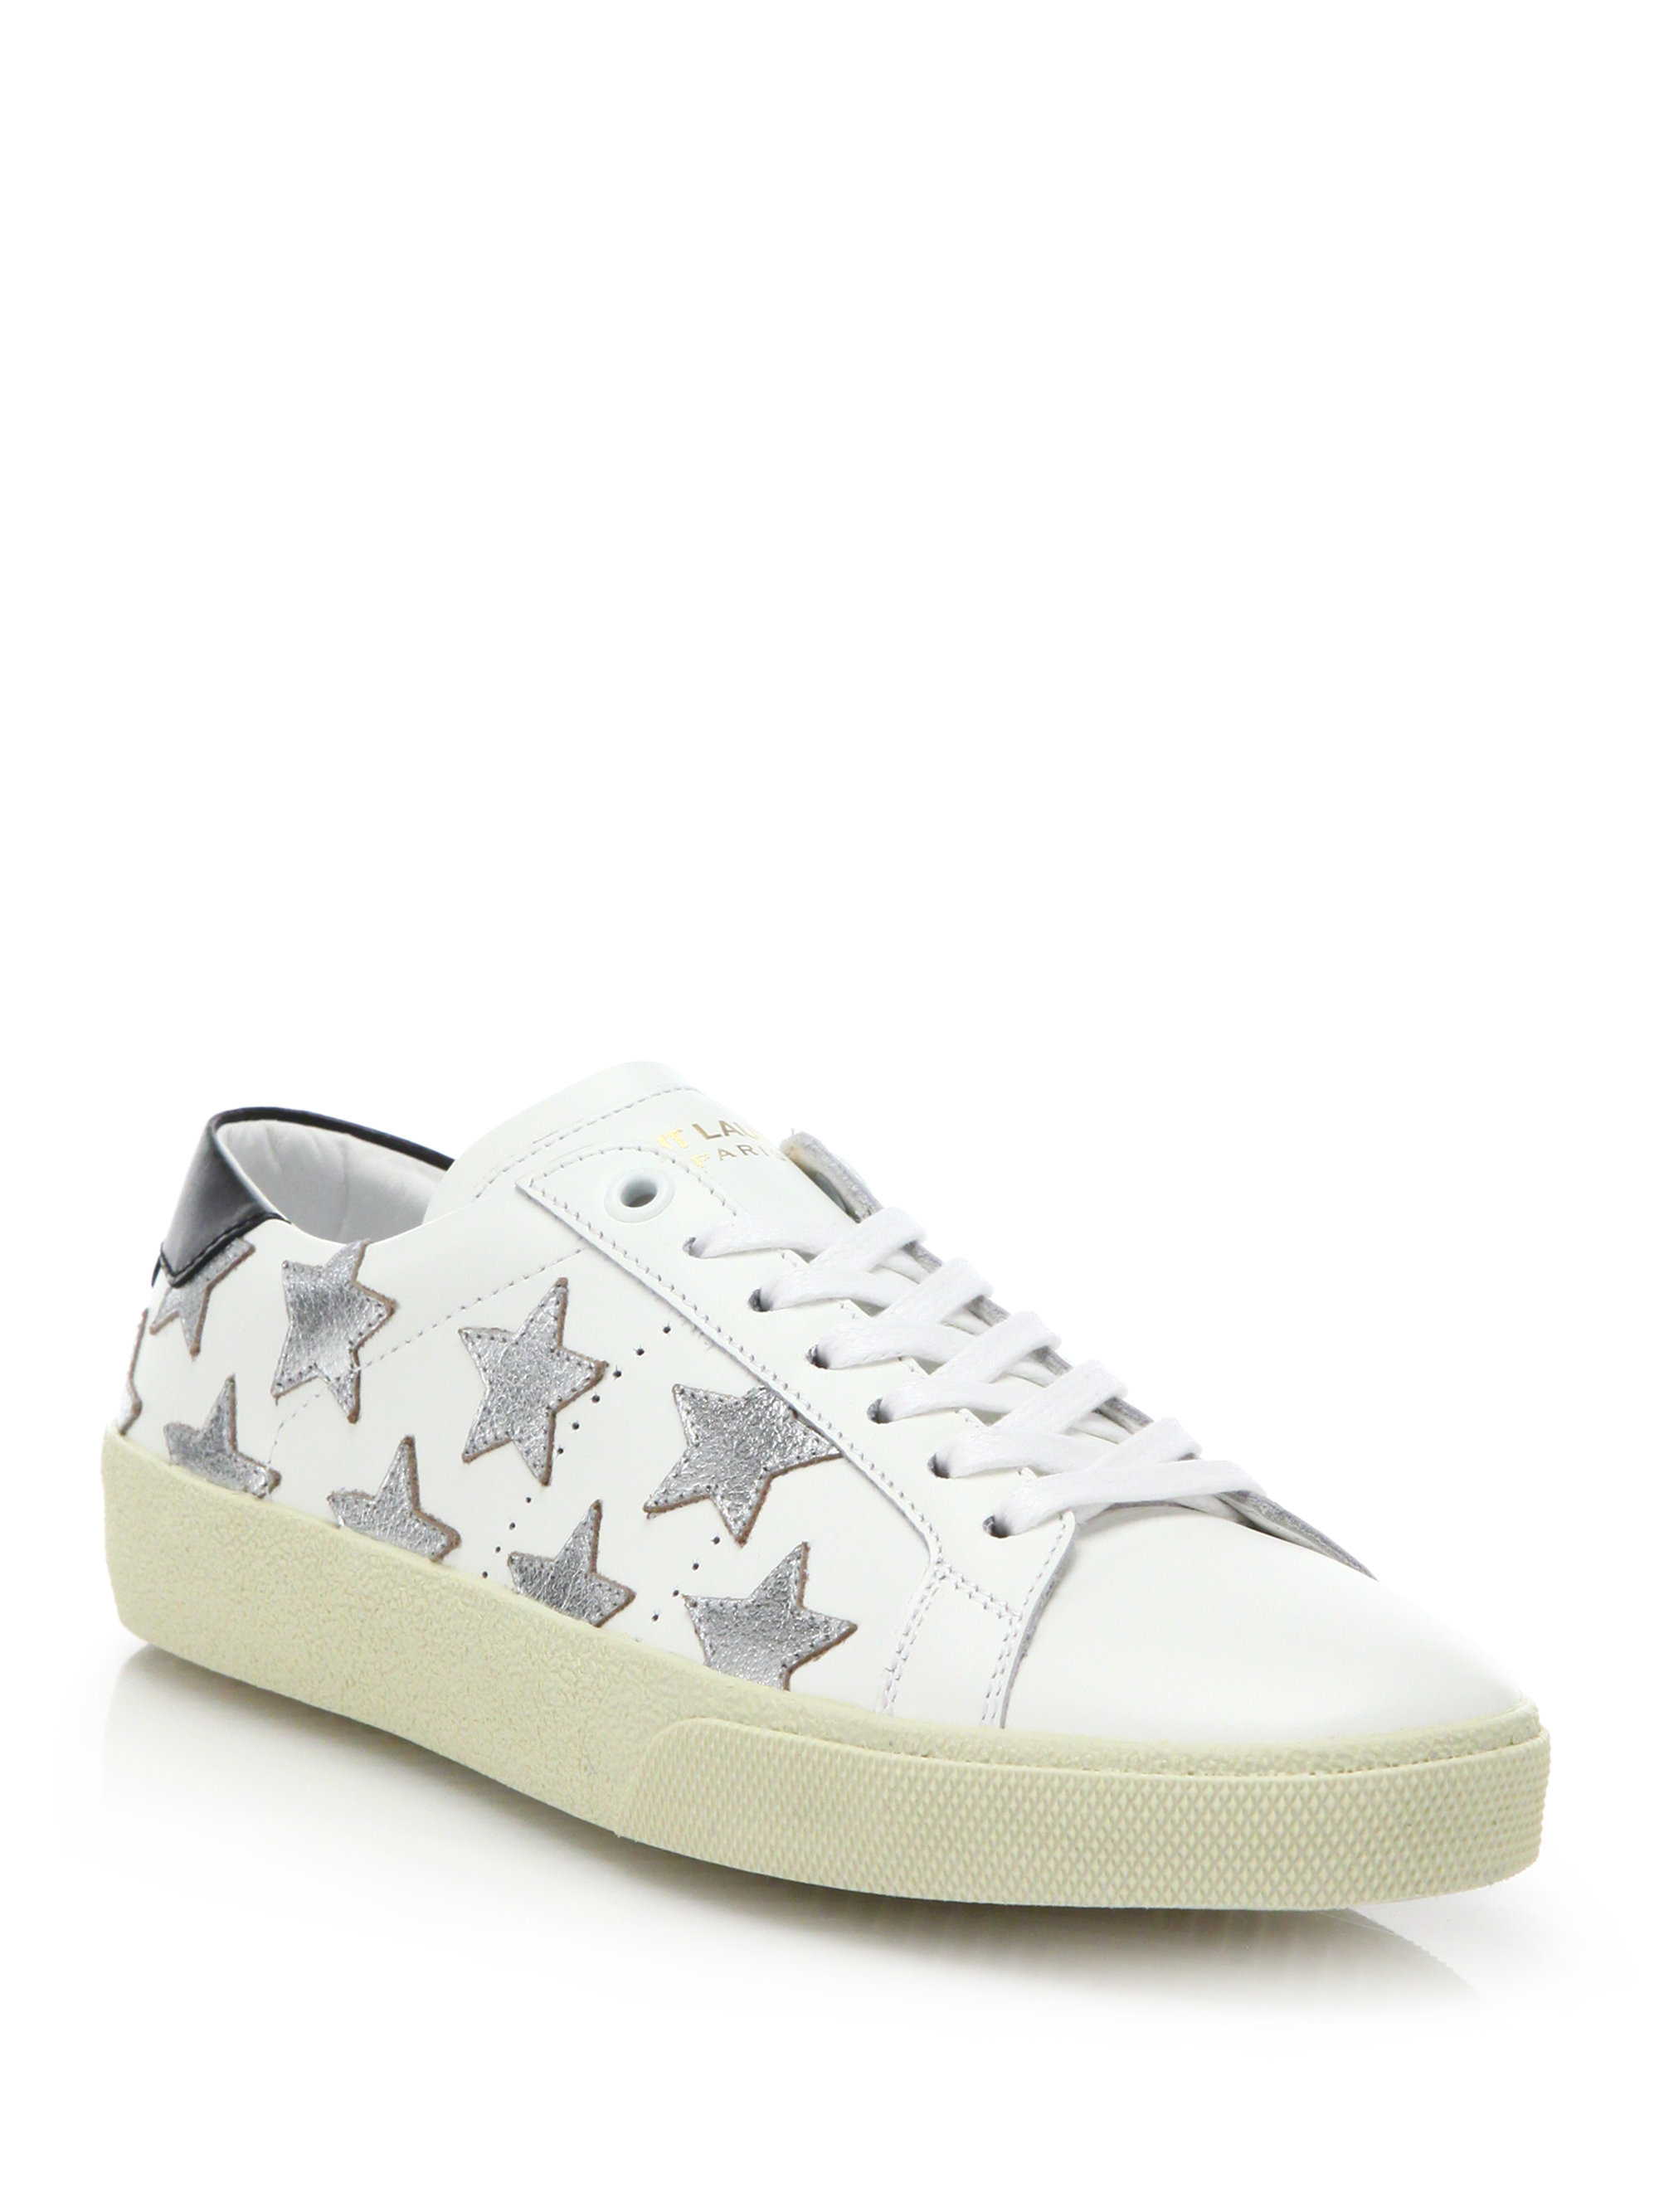 Saint laurent Court Classic Leather & Metallic Star Sneakers in White ...